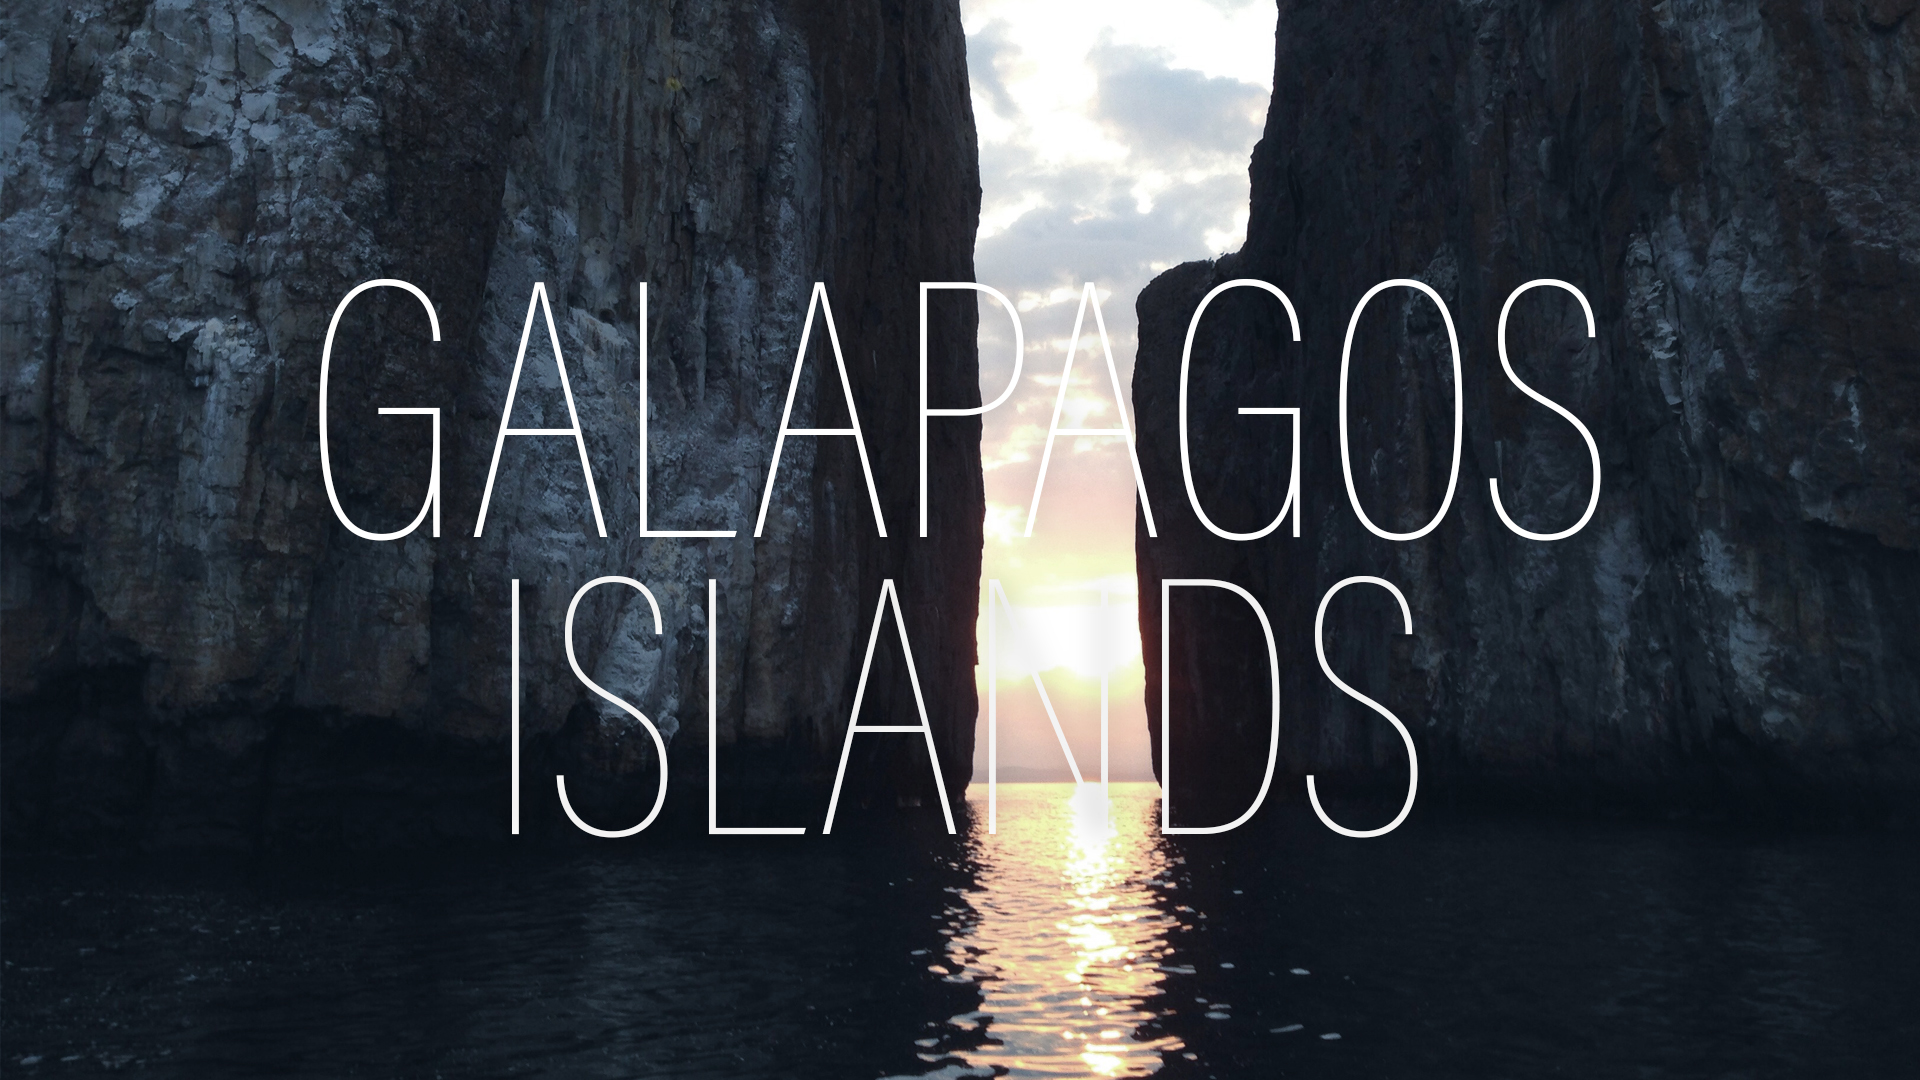 Home to some of the most beautiful ocean life you will find anywhere in the world, the Galapagos Islands is for those who crave tranquillity and enchantment via nature. Find out more.